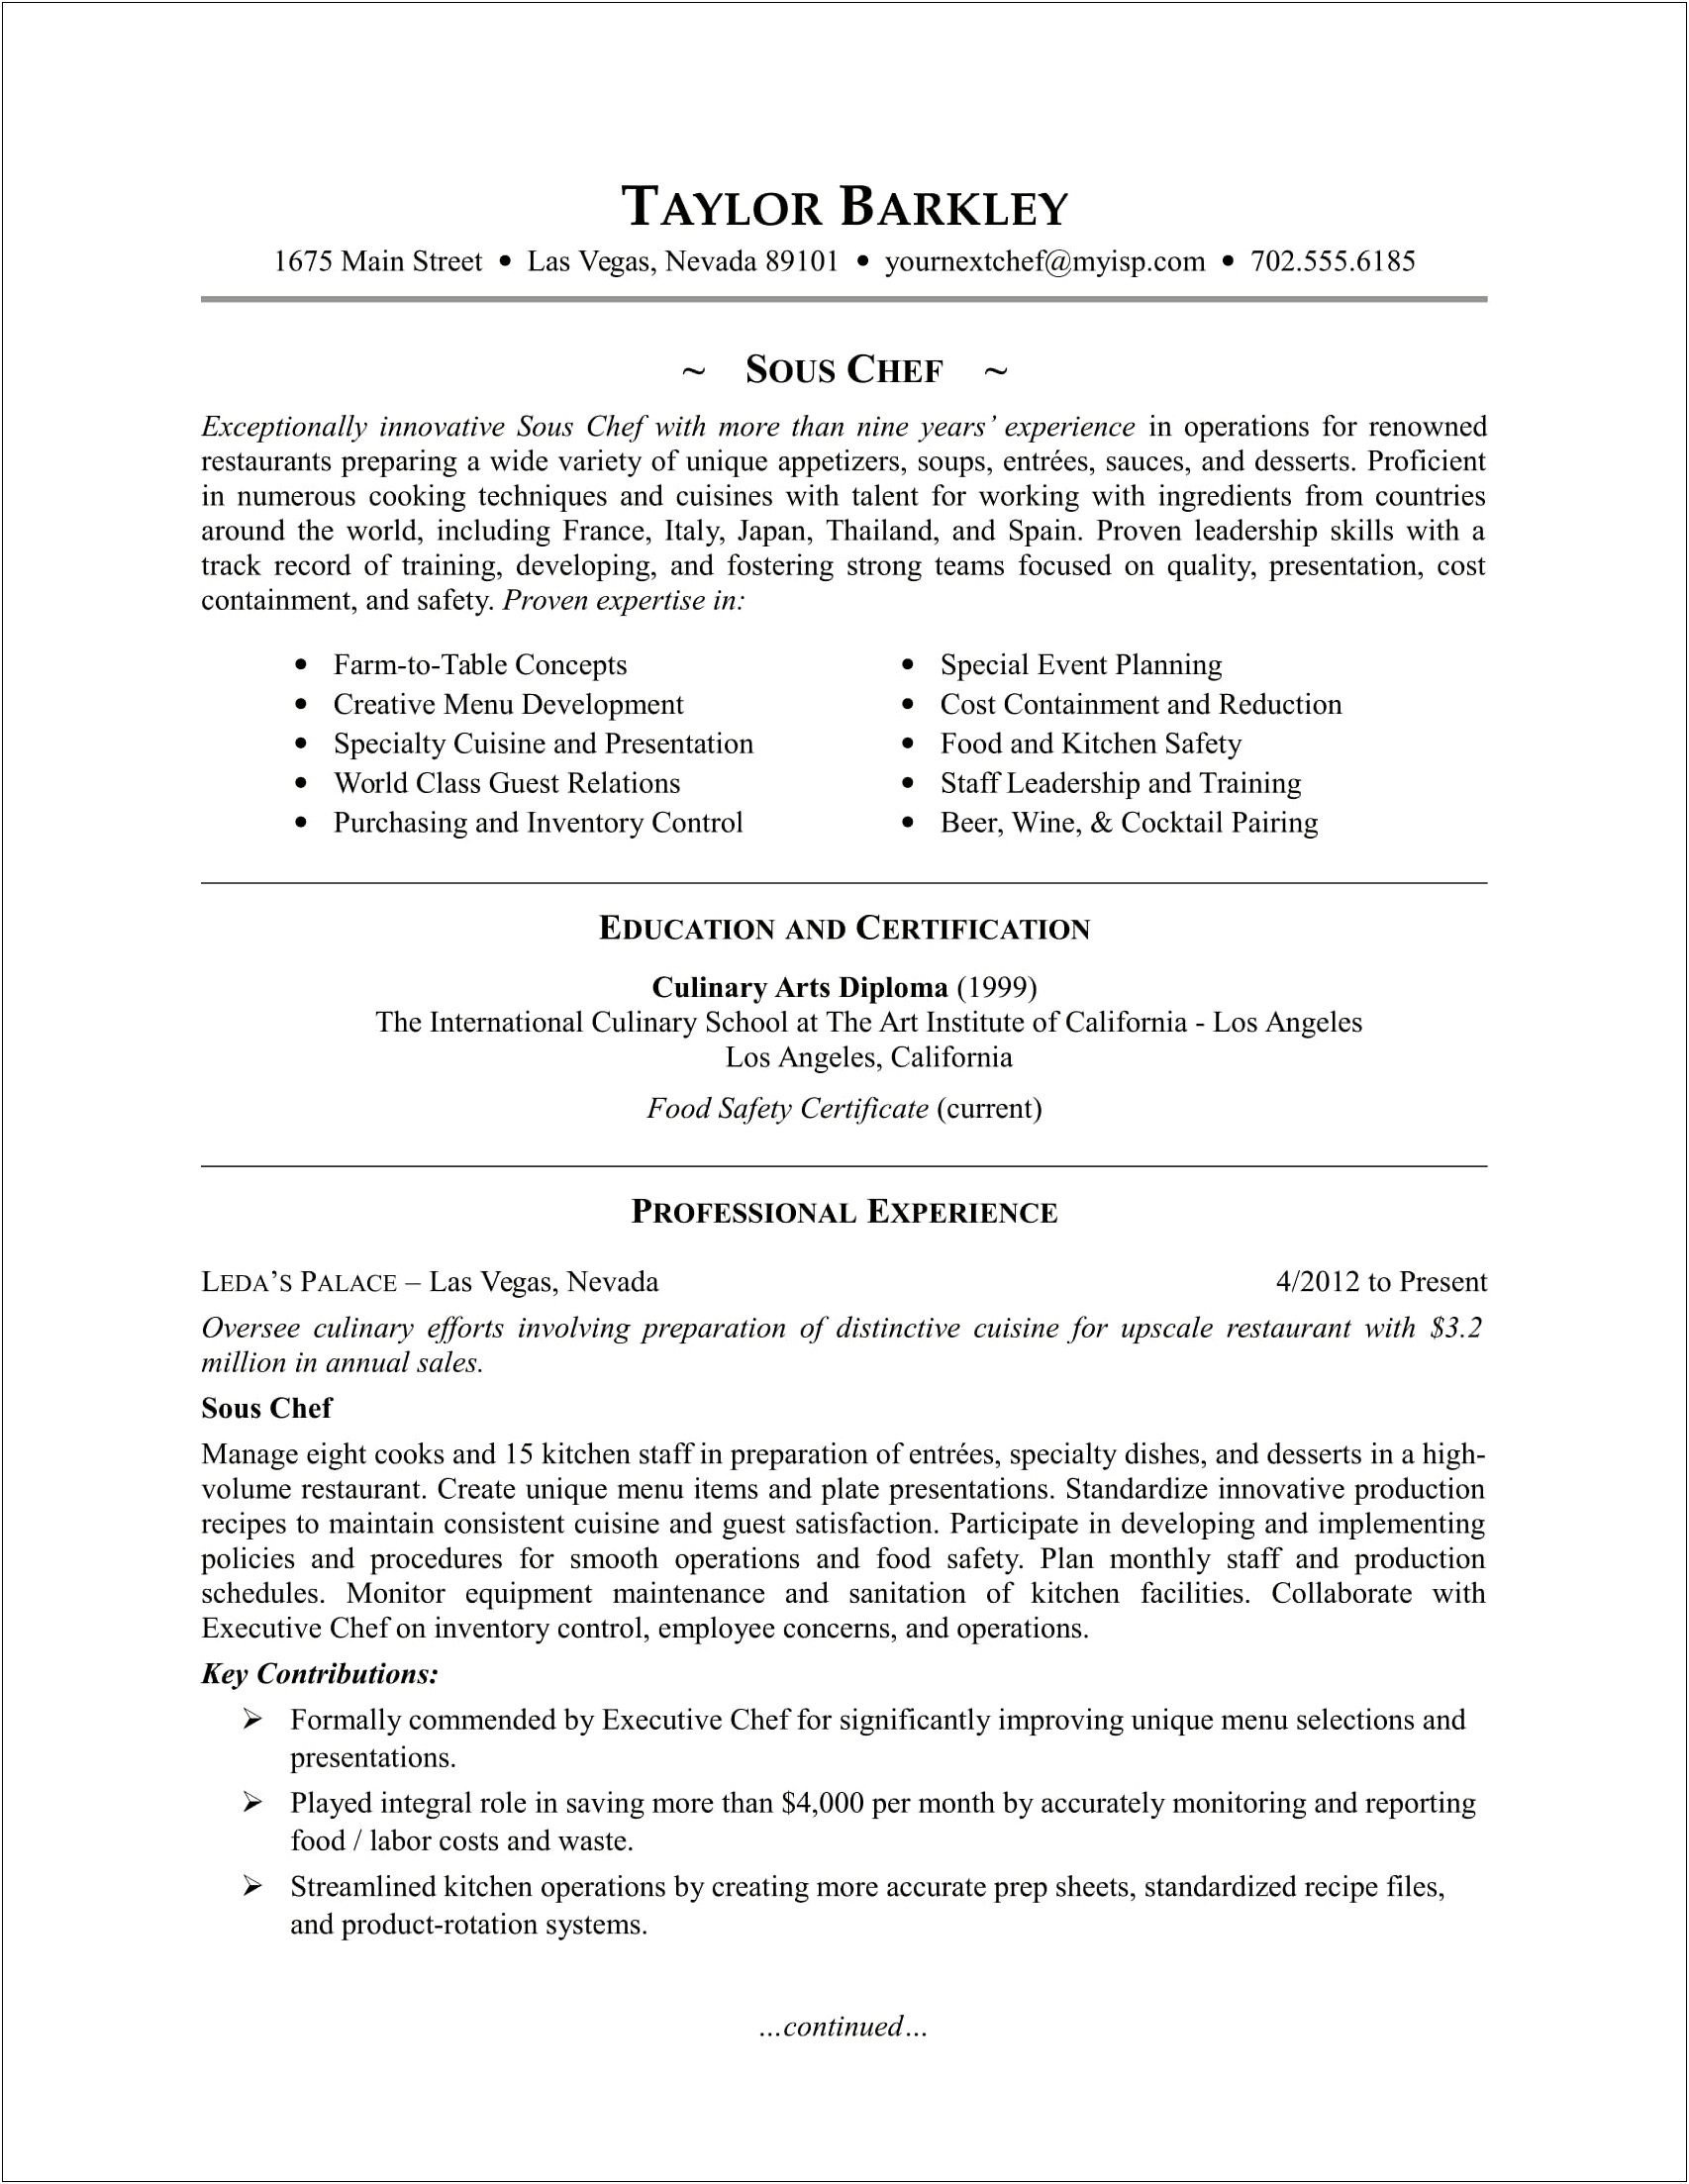 Resume Objective For A Chef